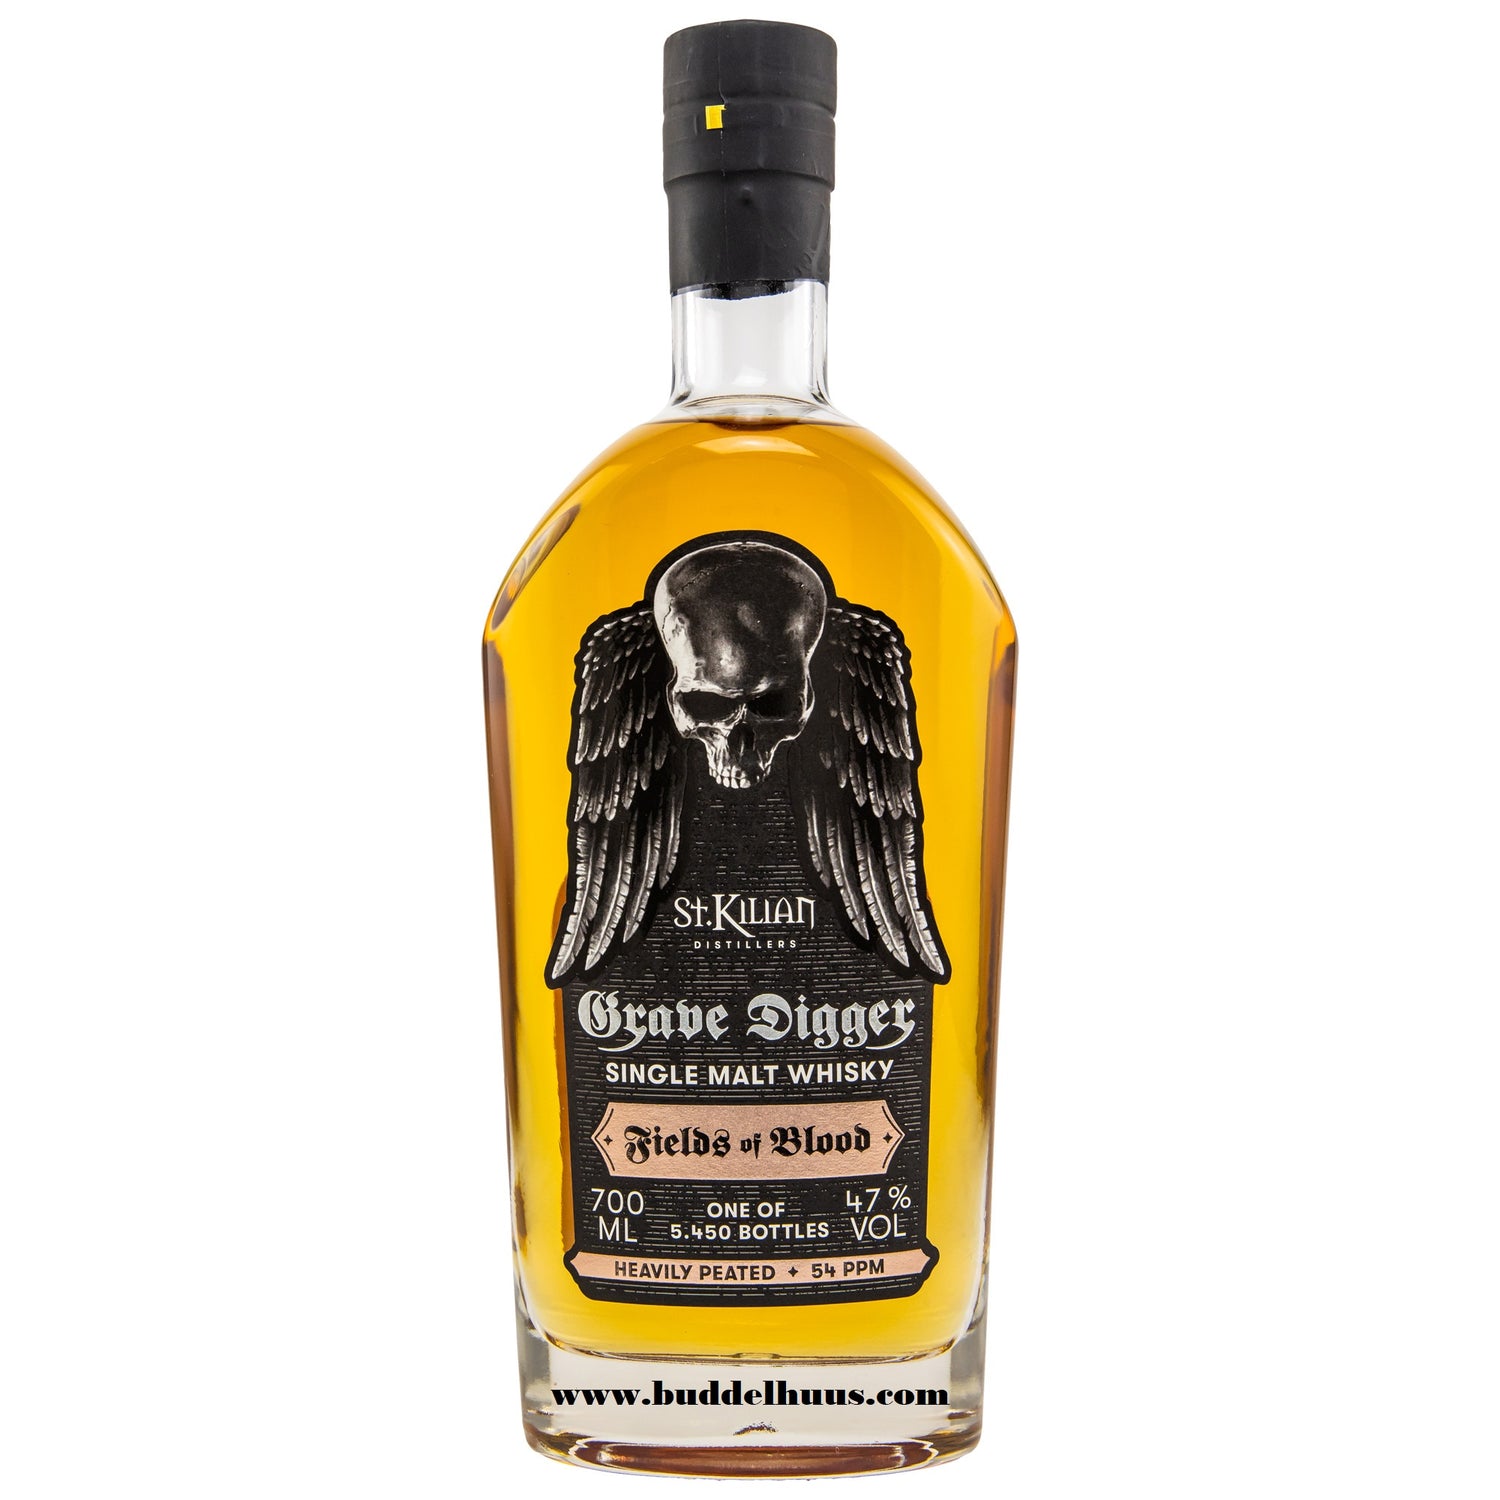 St. Kilian Grave Digger Field of Blood Peated Whisky